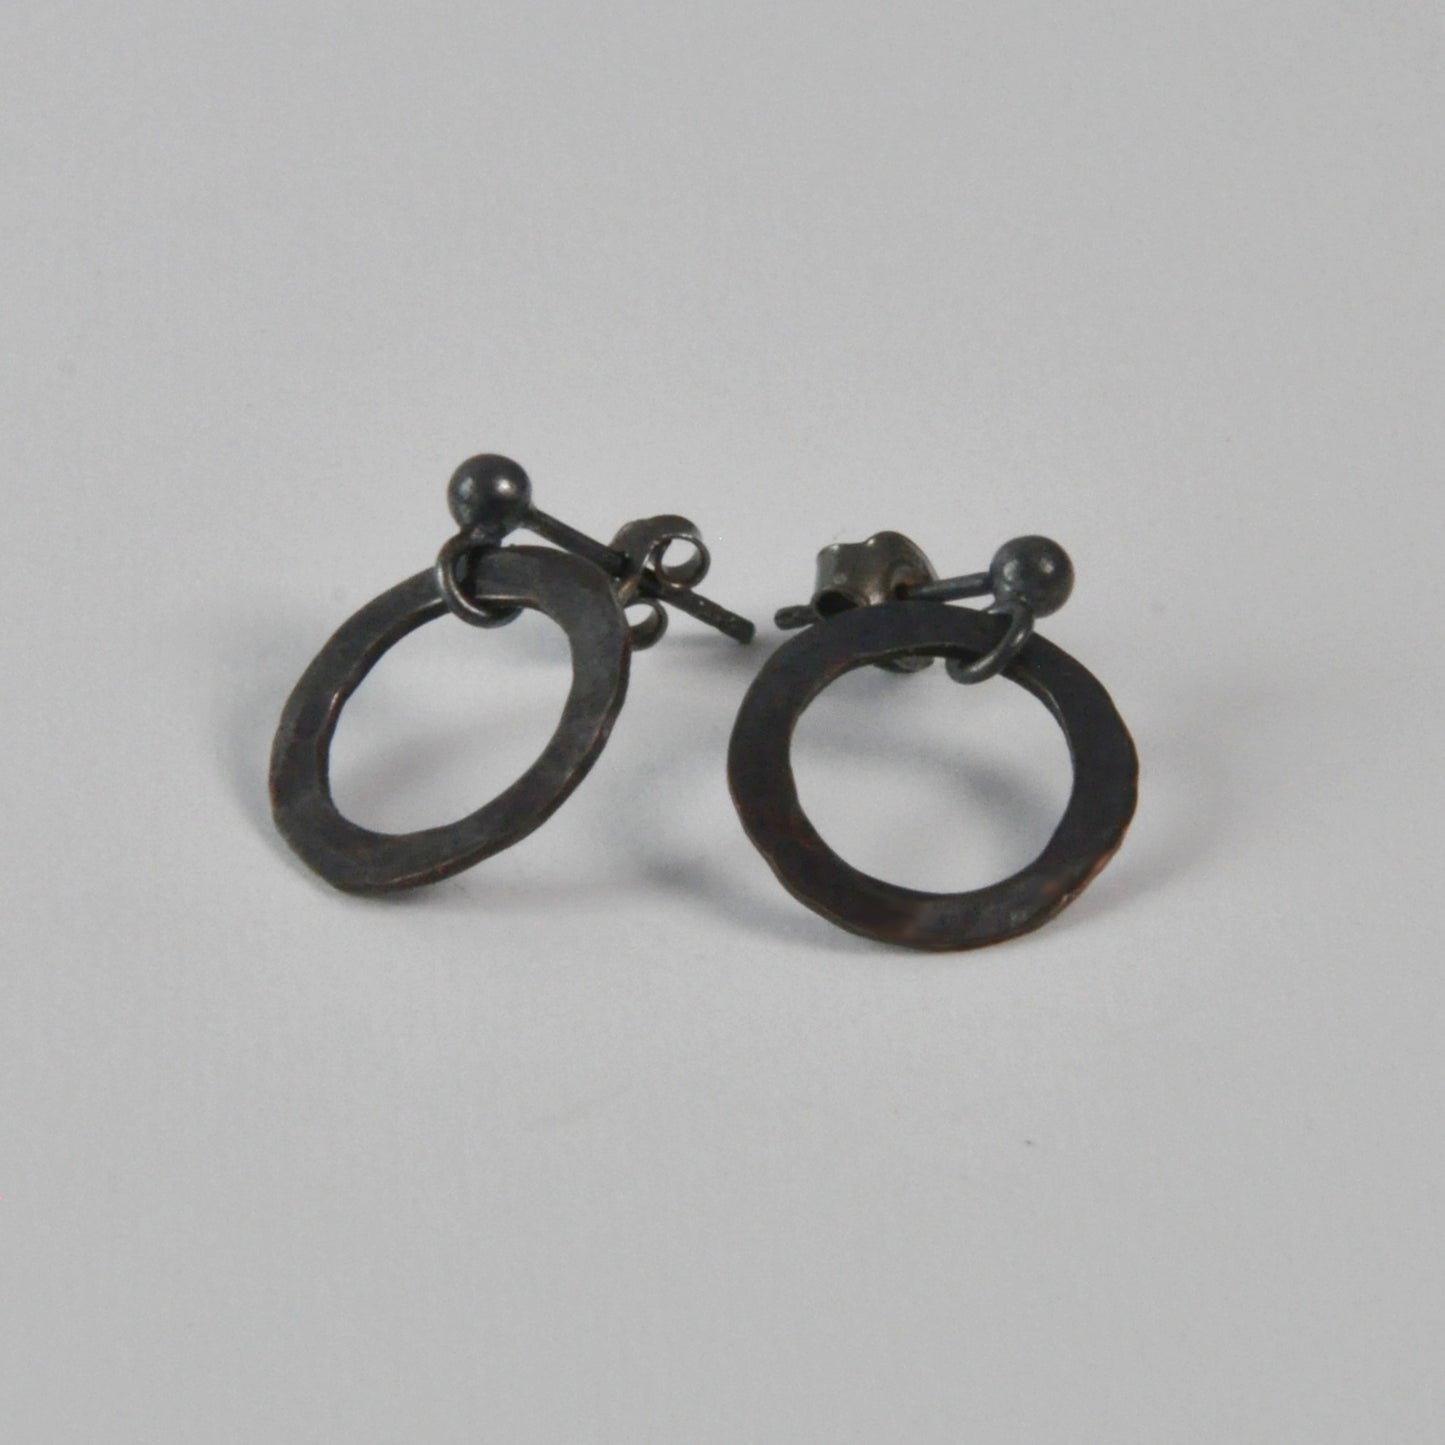 Artisanal, minimalist copper and silver 'Almost Black' earrings